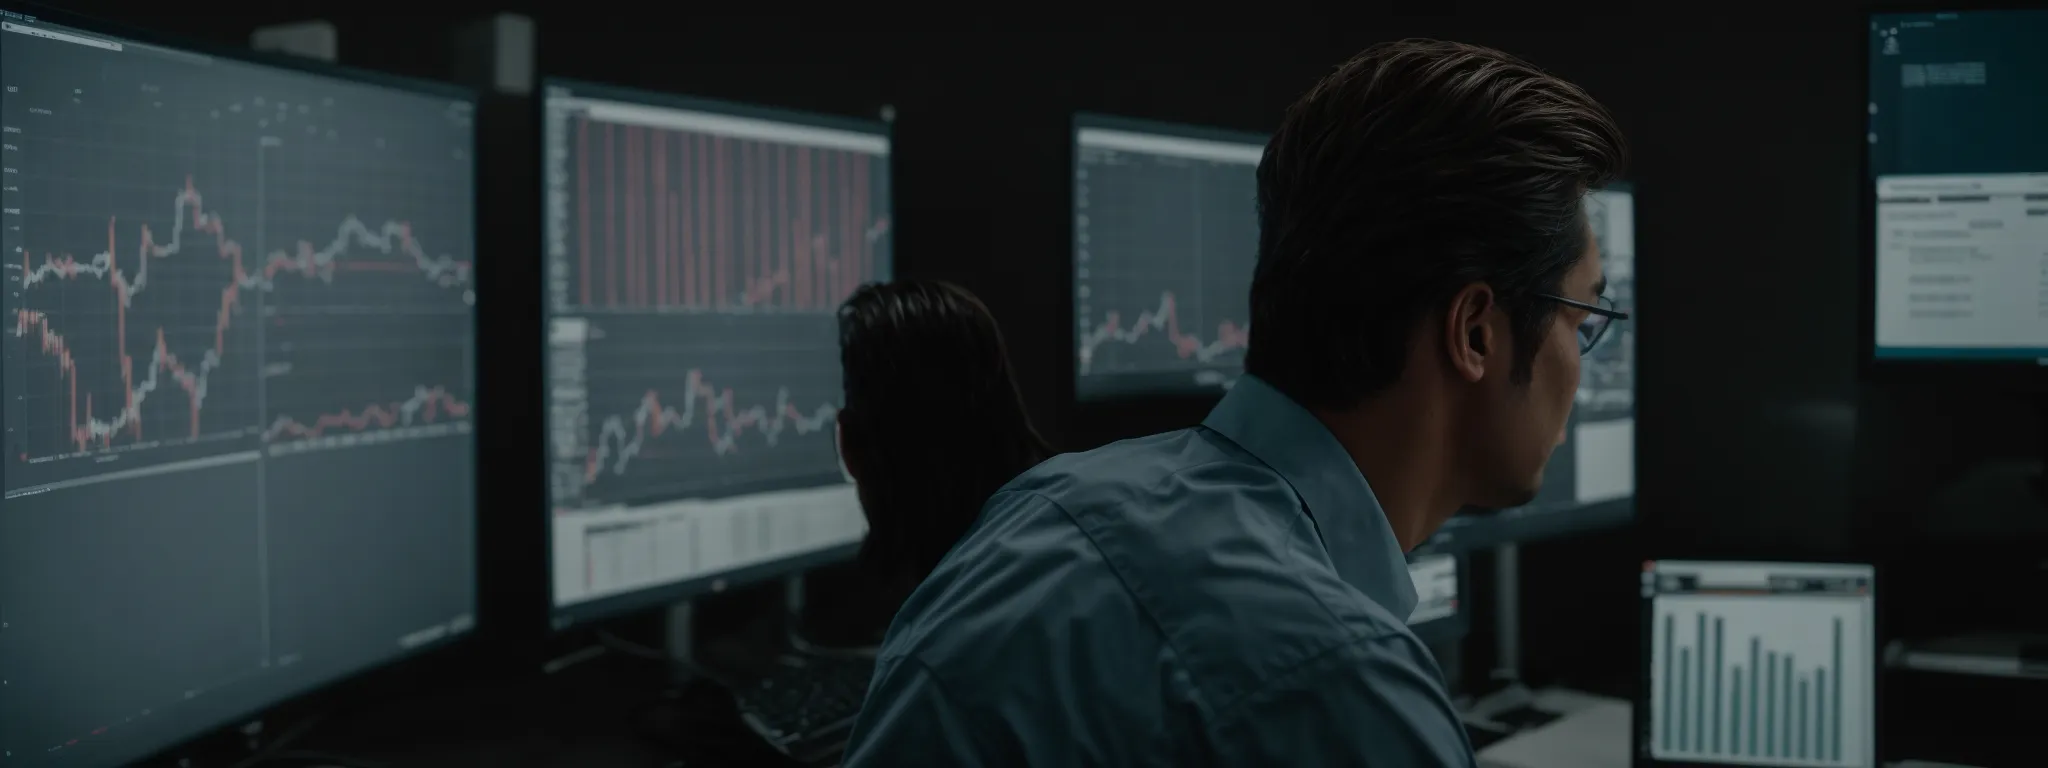 a confused business professional staring at a computer screen displaying incomprehensible graphs and charts.